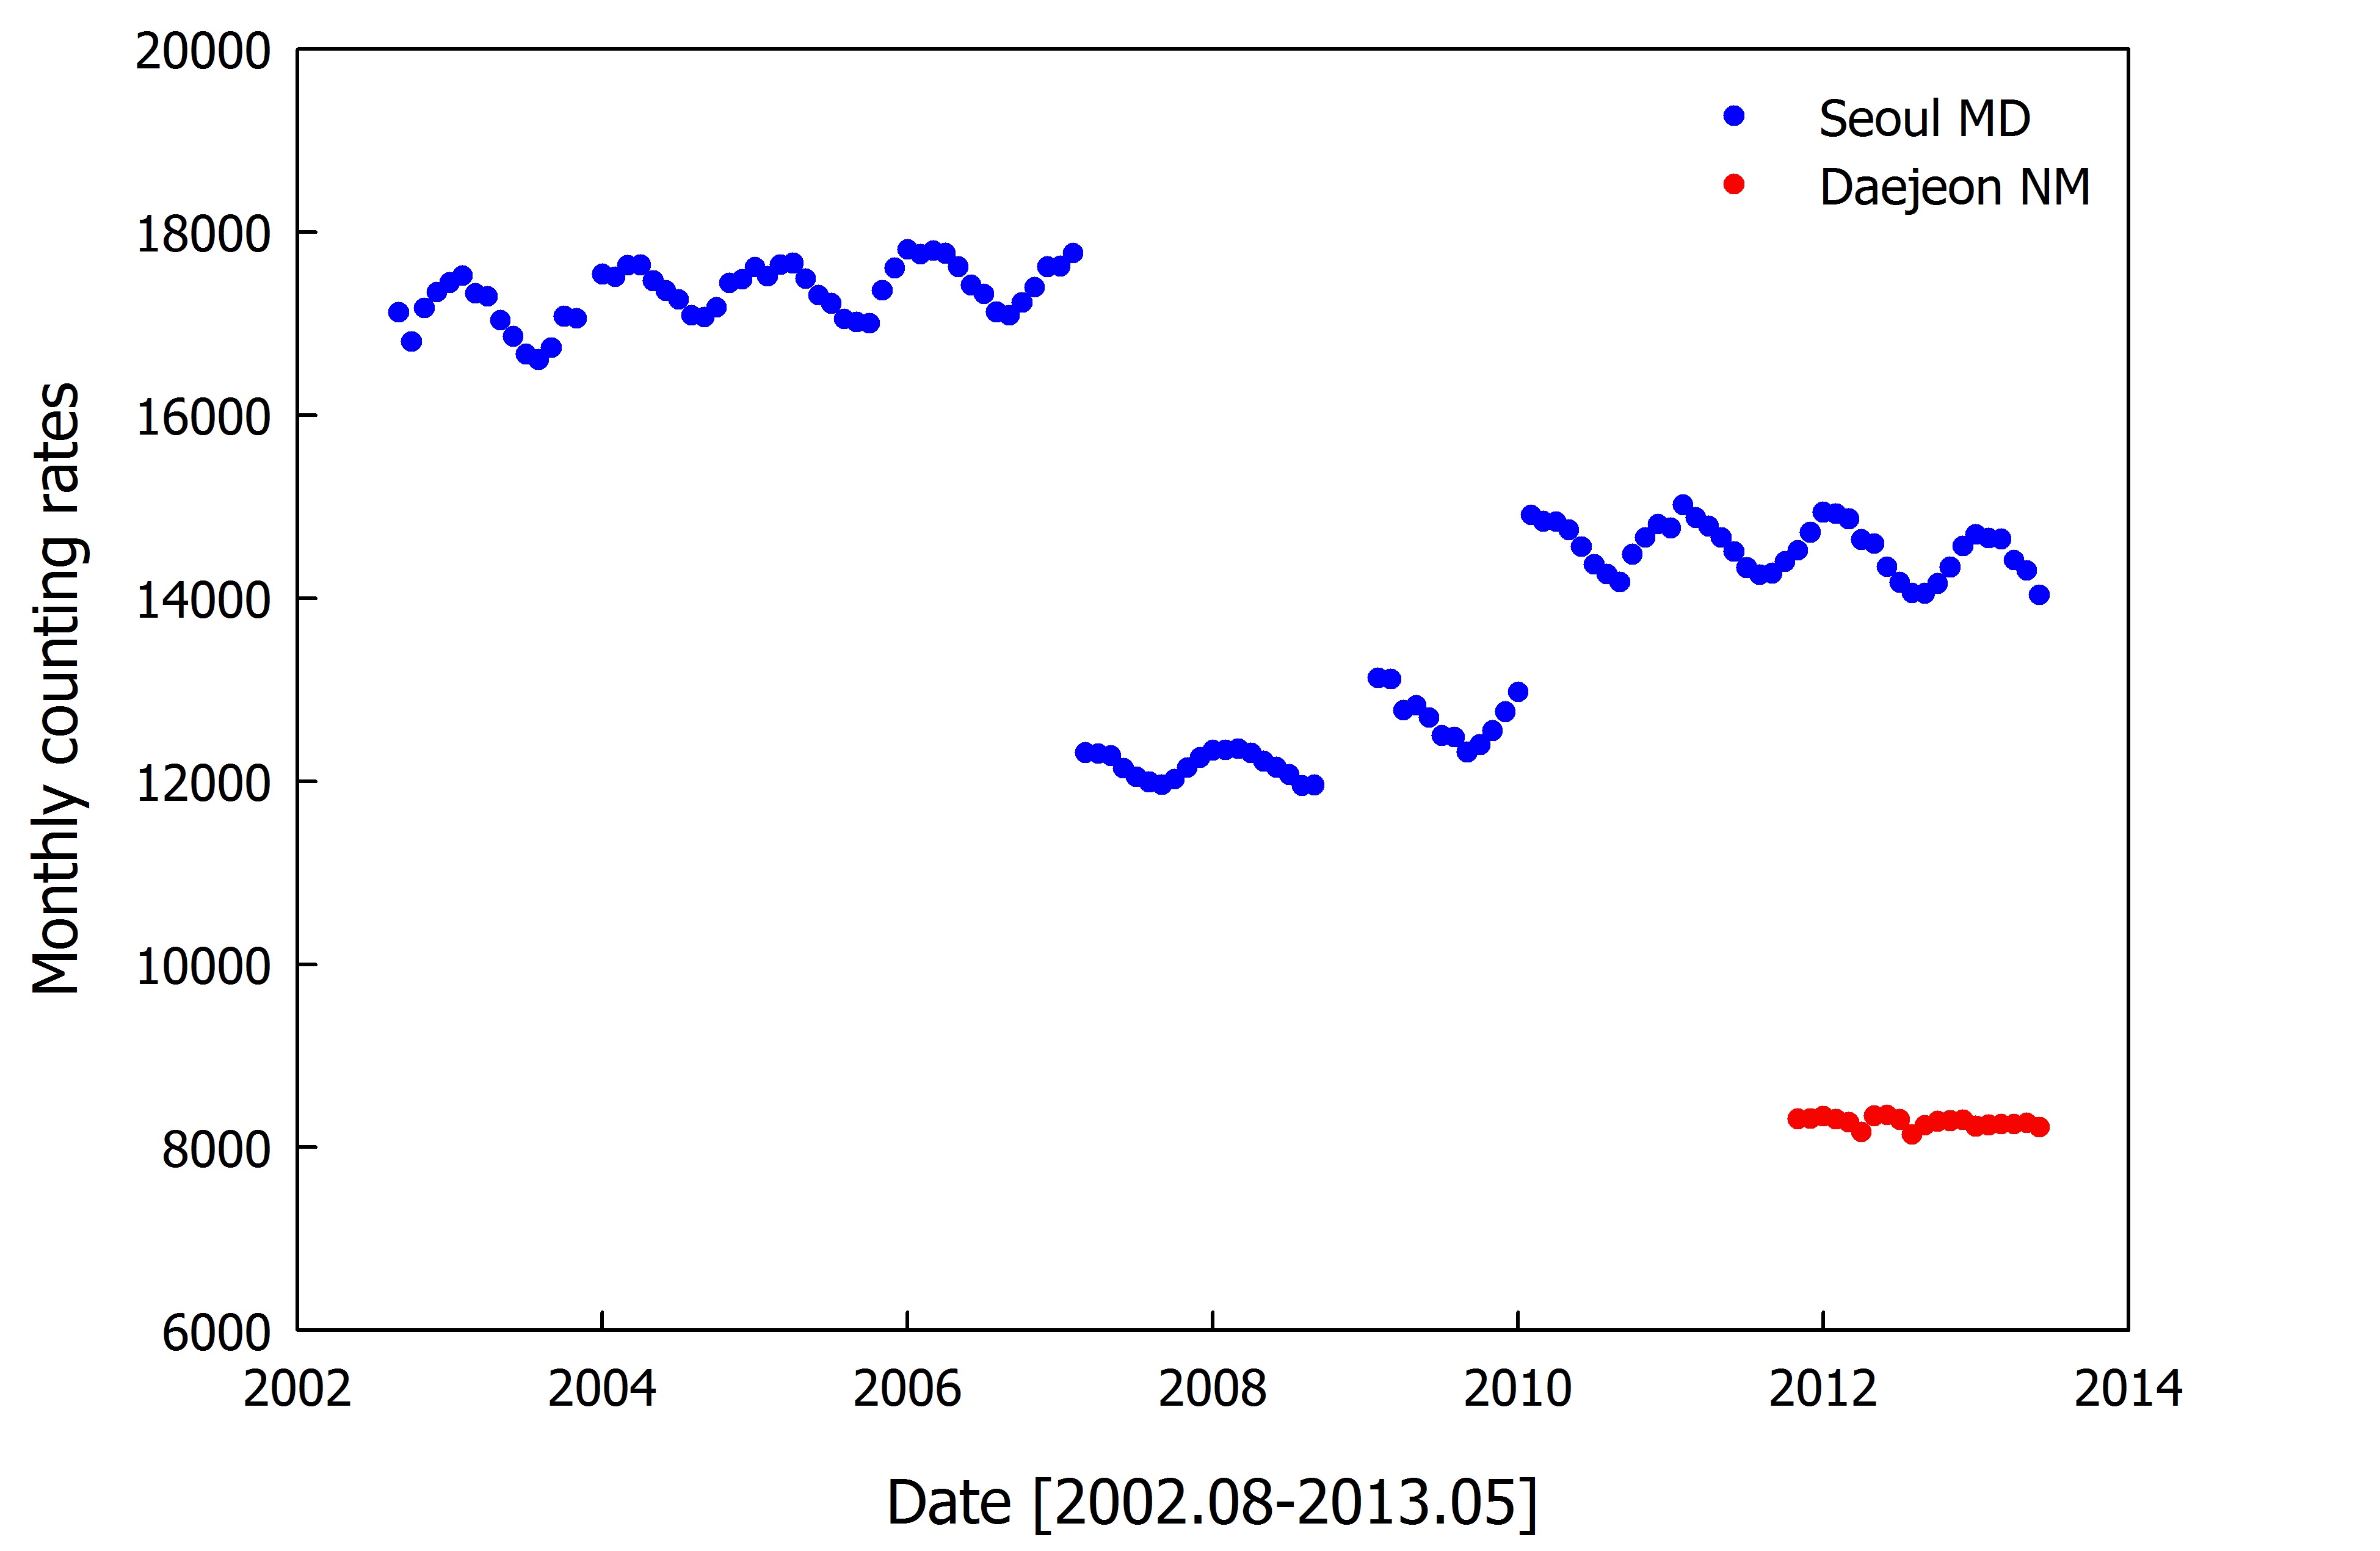 Monthly counting rates observed by Seoul muon detector (MD) and
Daejeon neutron monitor (NM). Blue and red circles represent muon and
neutron, respectively.